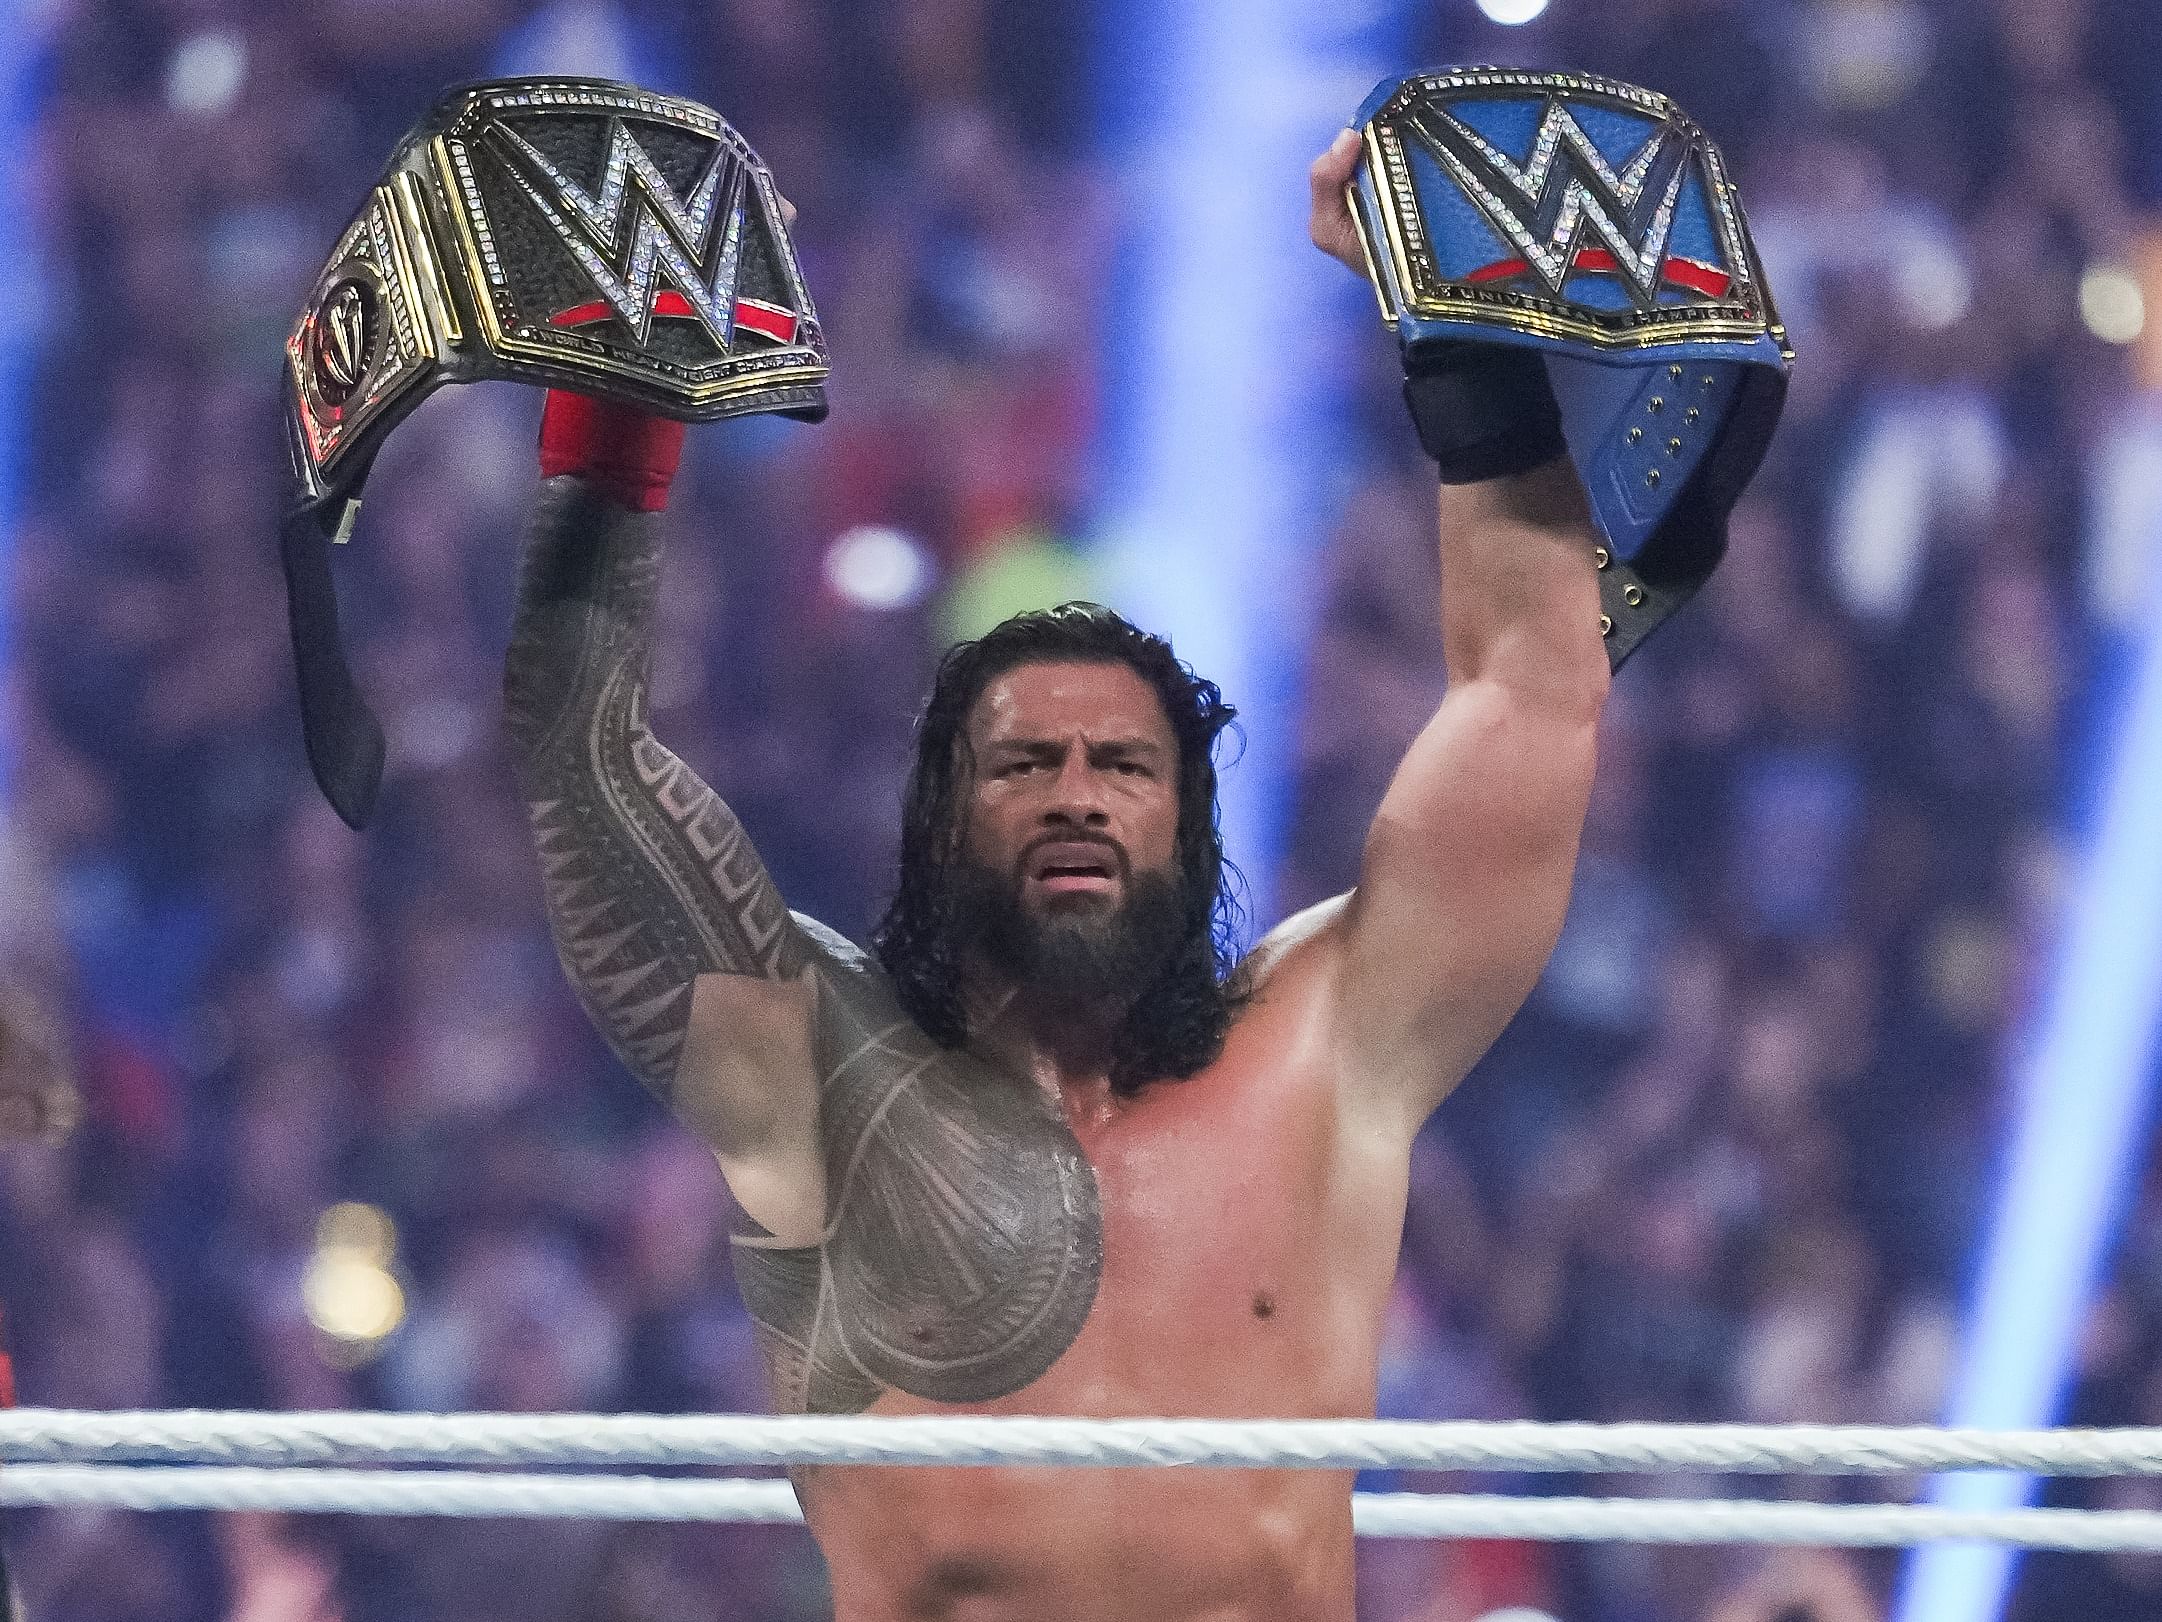 Roman Reigns holding the WWE and Universal Championships.